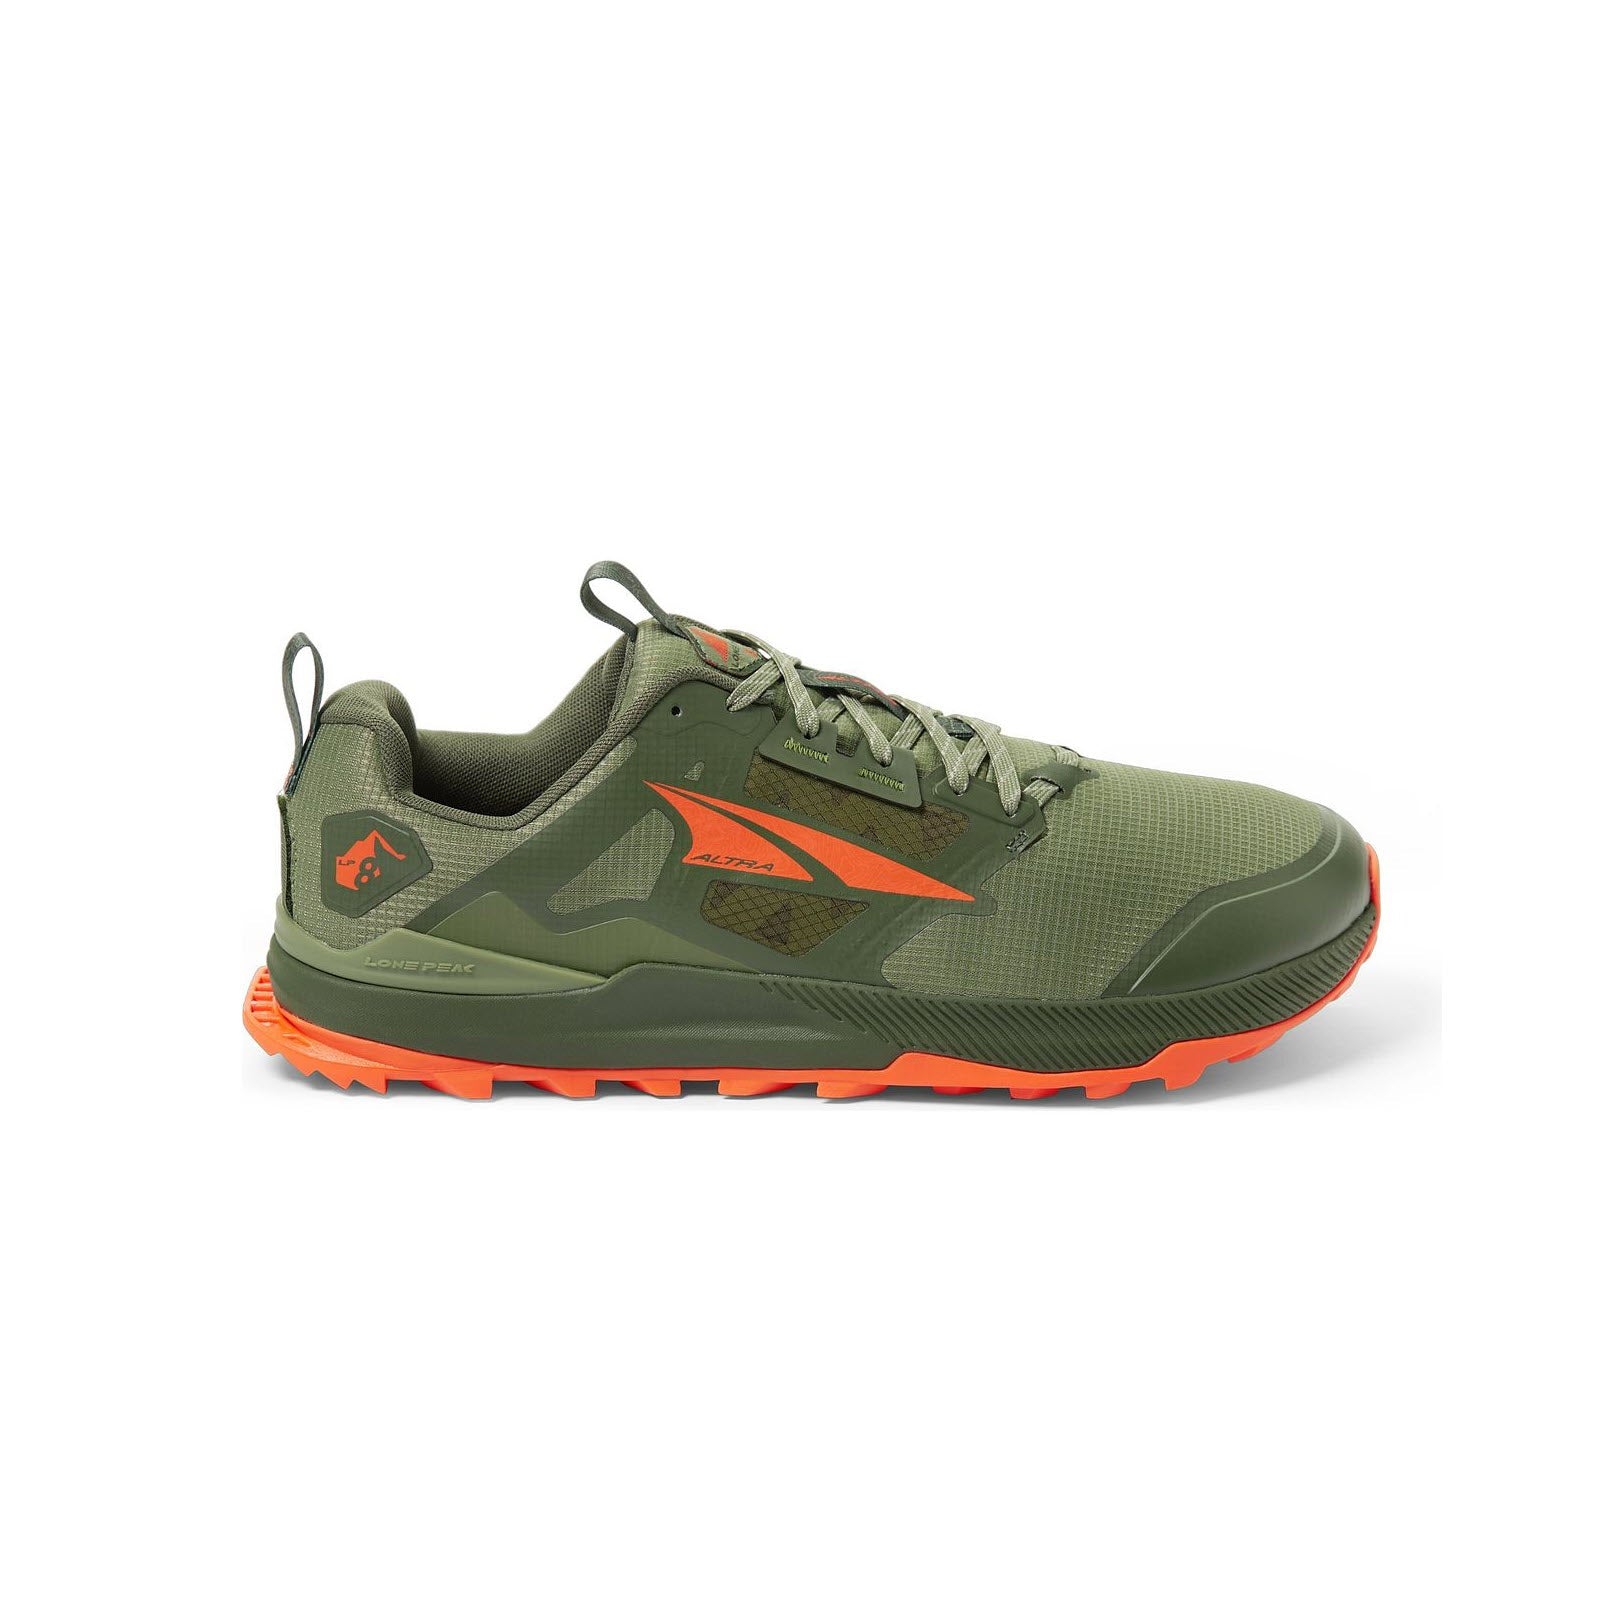 Side view of a green and orange Altra Lone Peak 8 men's trail running shoe with a rugged MaxTrac™ outsole, isolated on a white background.